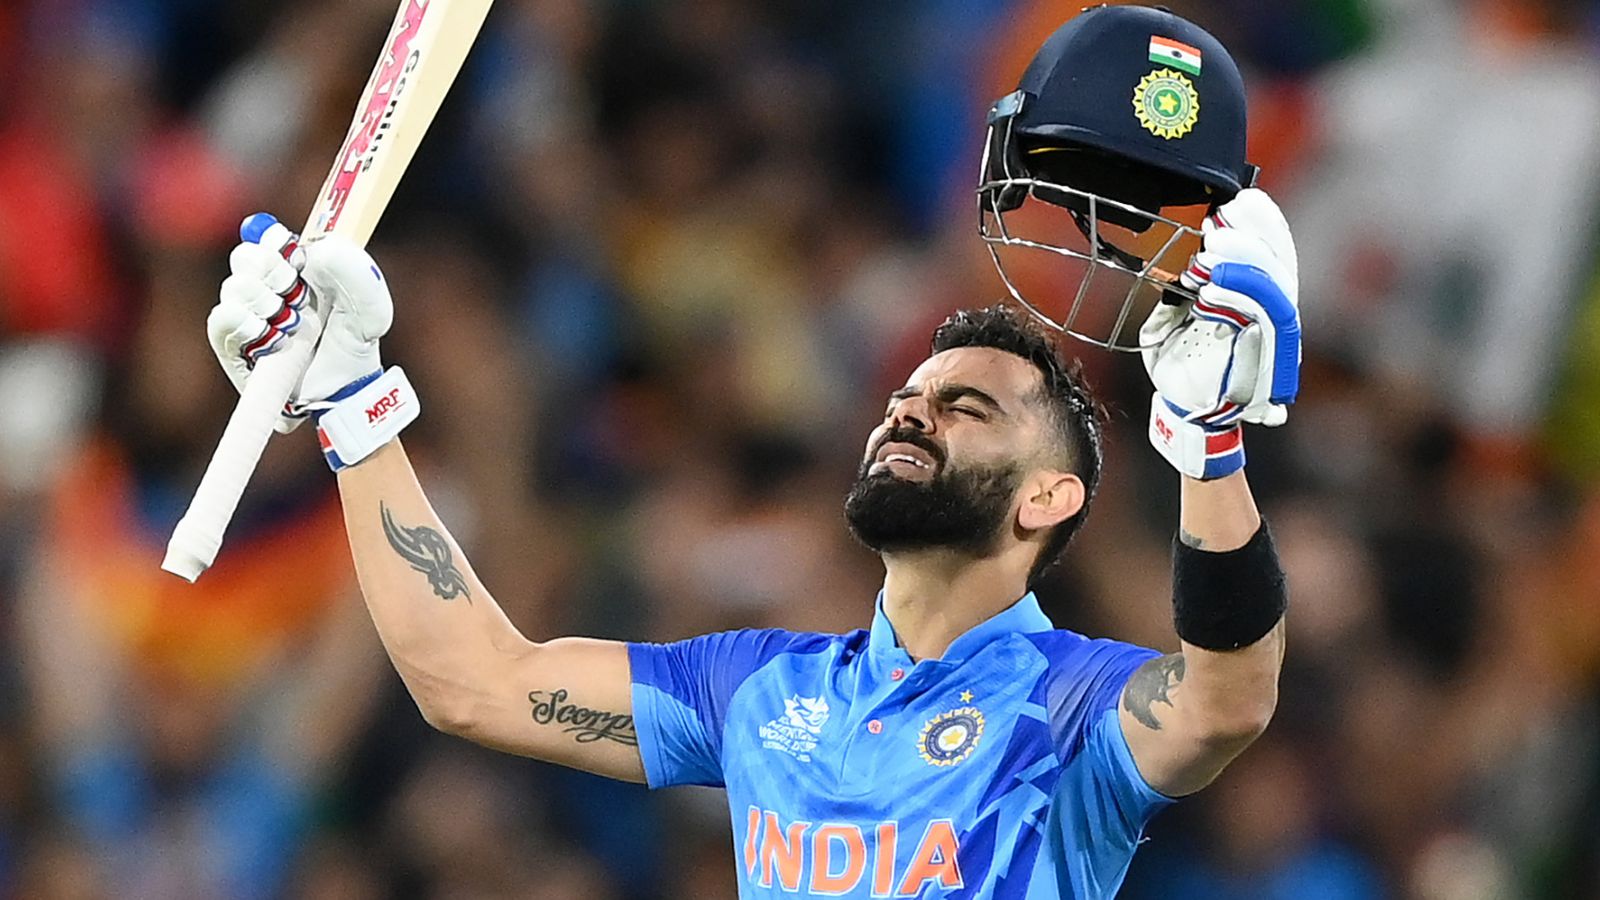 Virat Kohli stands tall as kingpin after India vs Pakistan T20 World Cup  game that had everything | Cricket News | Sky Sports